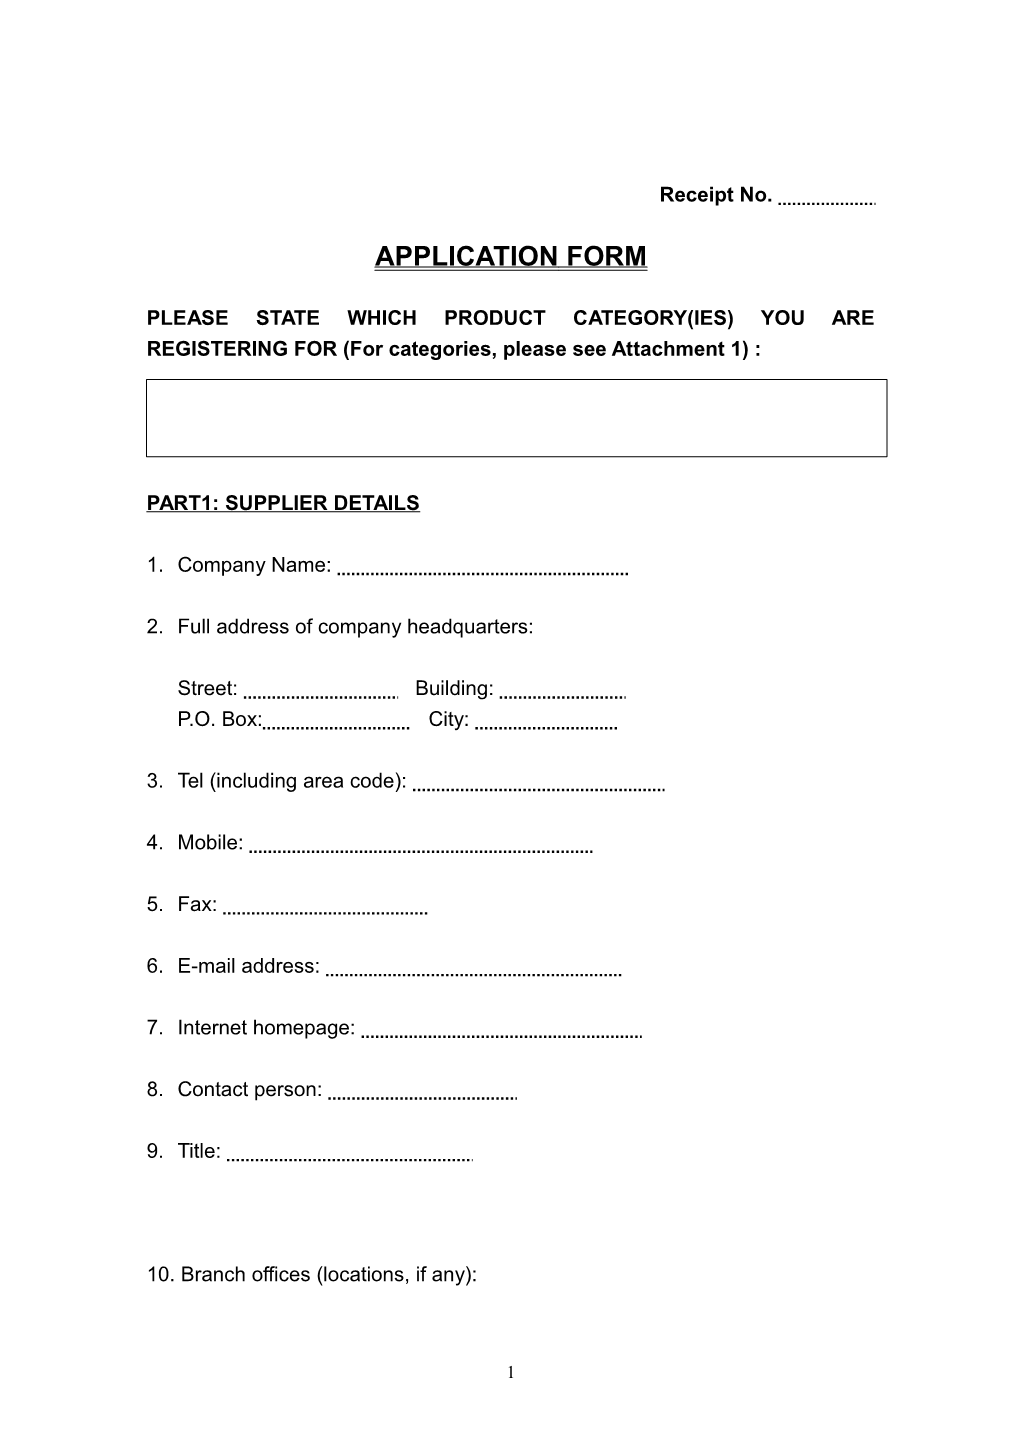 Application Form s71